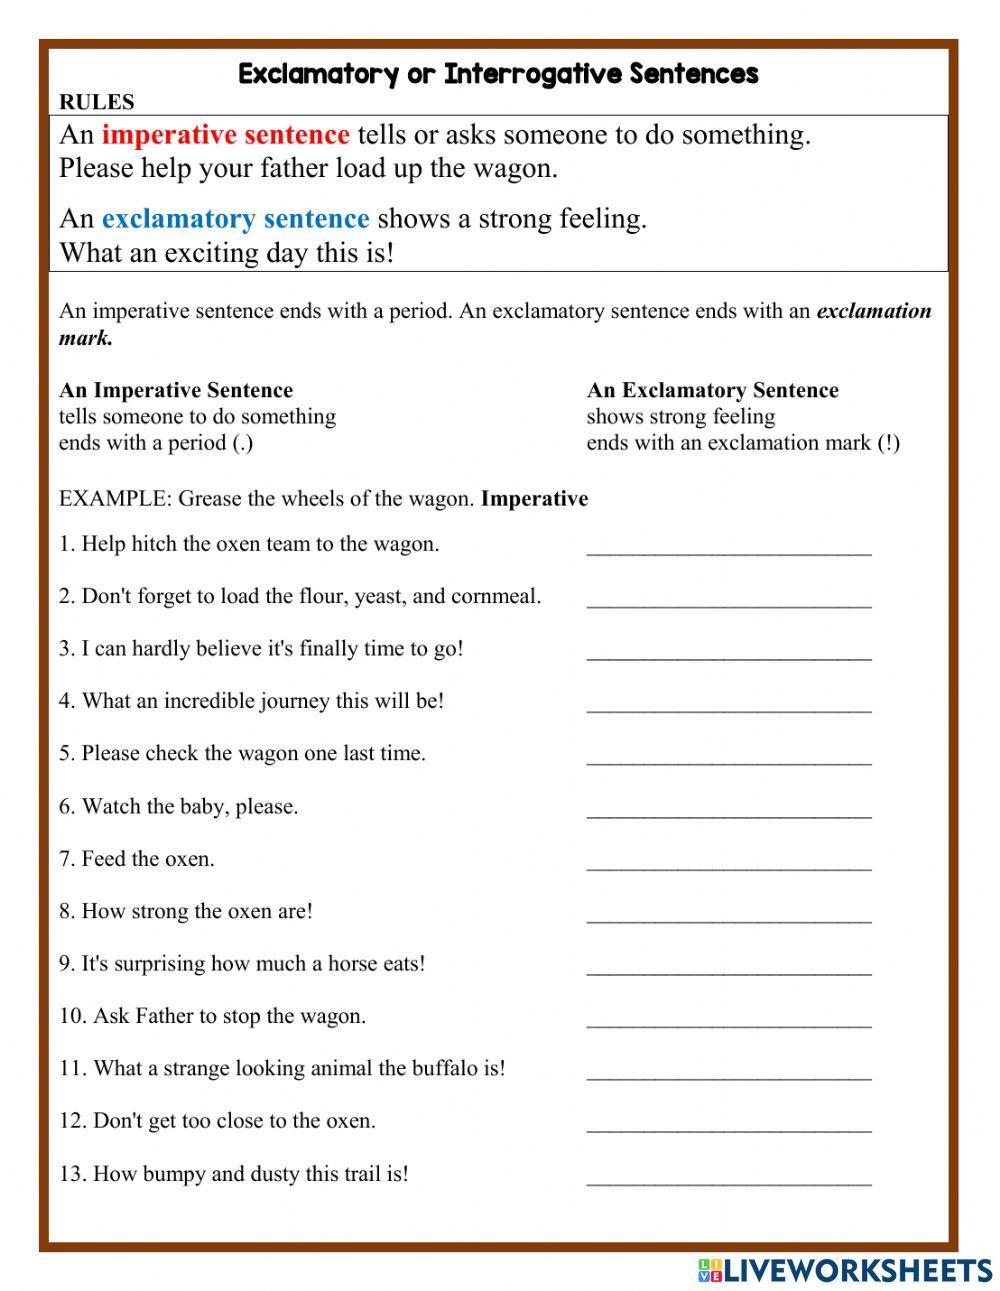 Worksheets Fourth Grade Imperative And Exclamatory Sentences